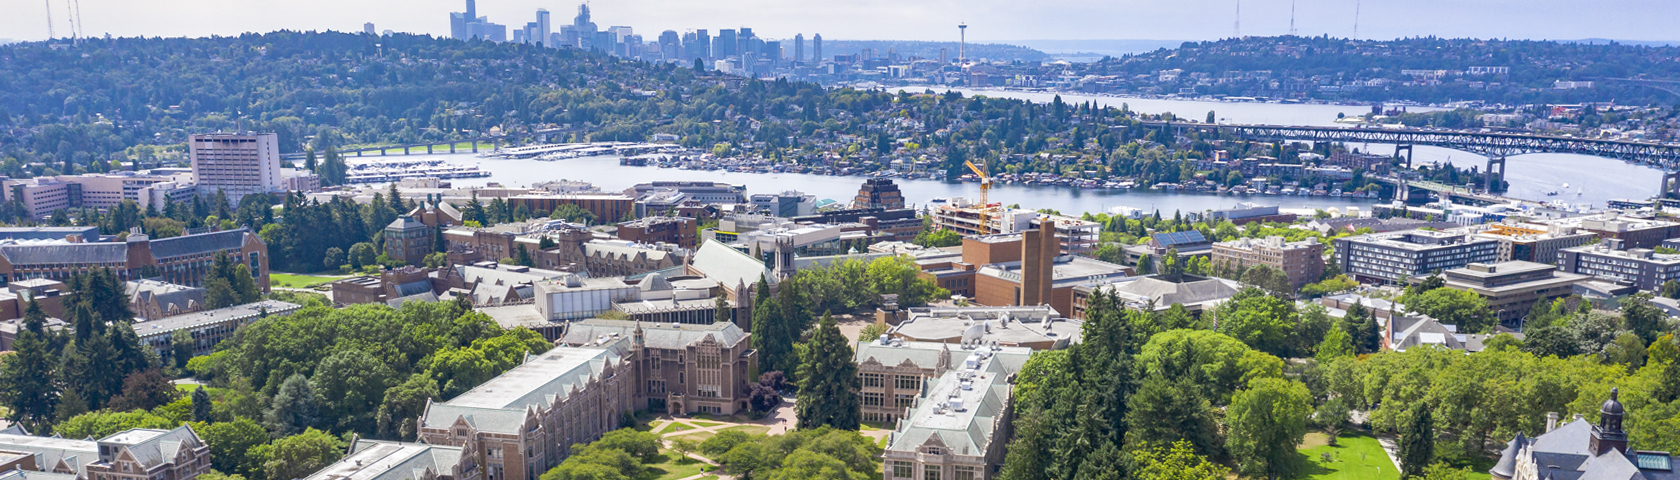 An aerial view of Seattle as seen from the UW campus.